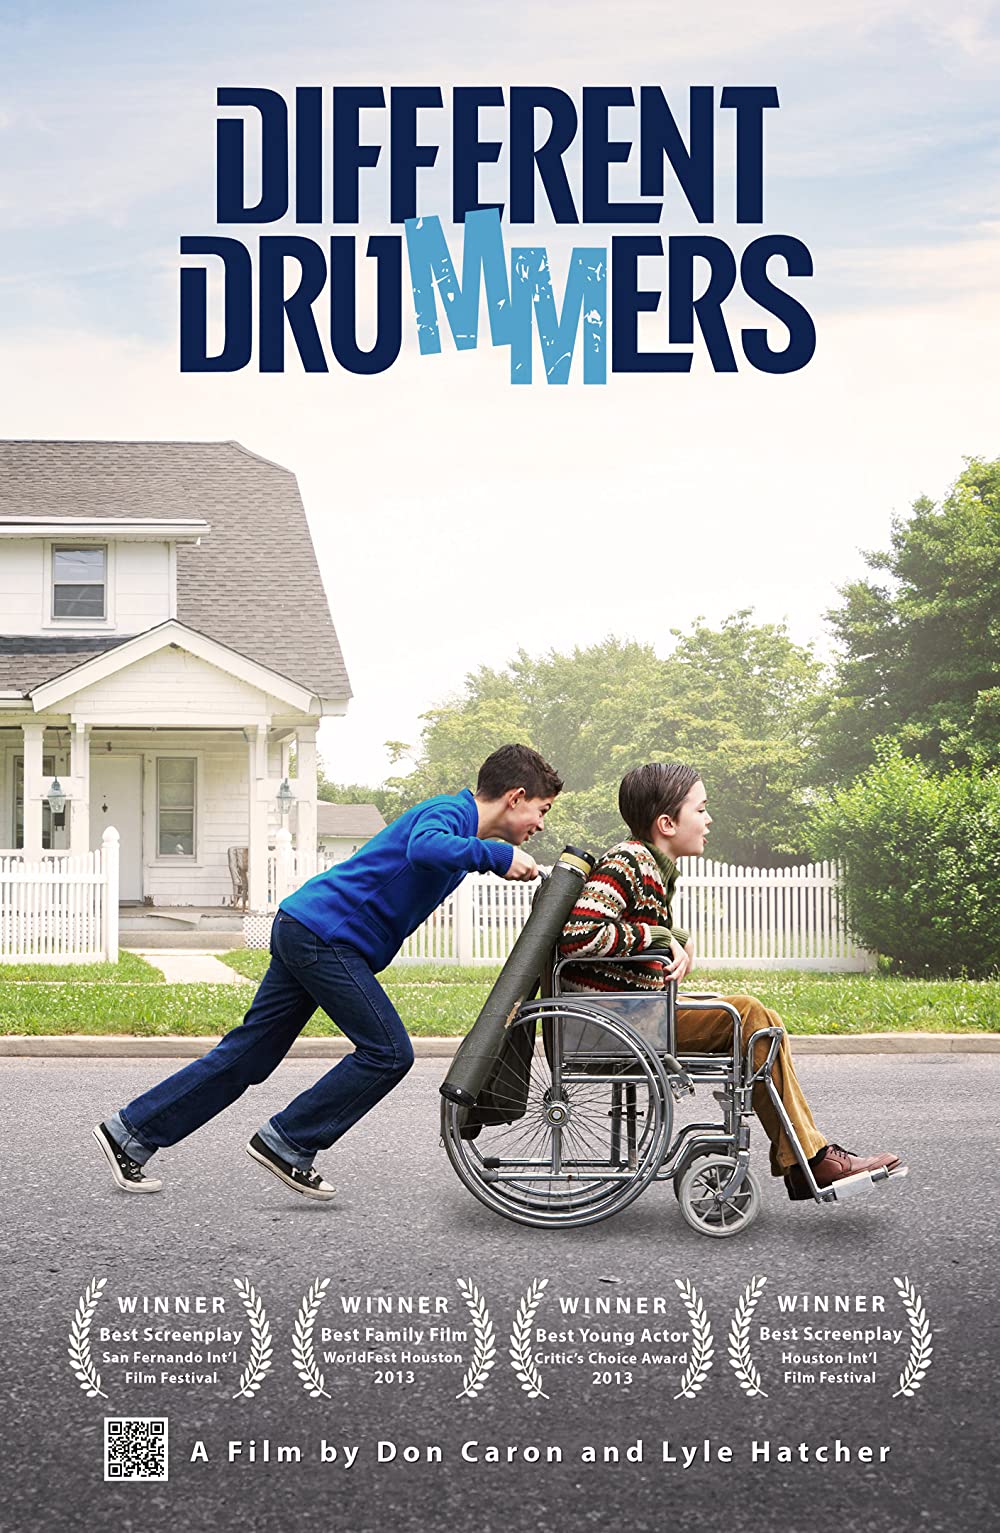 DVD Cover of Different Drummers, featuring Lyle putting maximum effort into pushing David's manual wheelchair